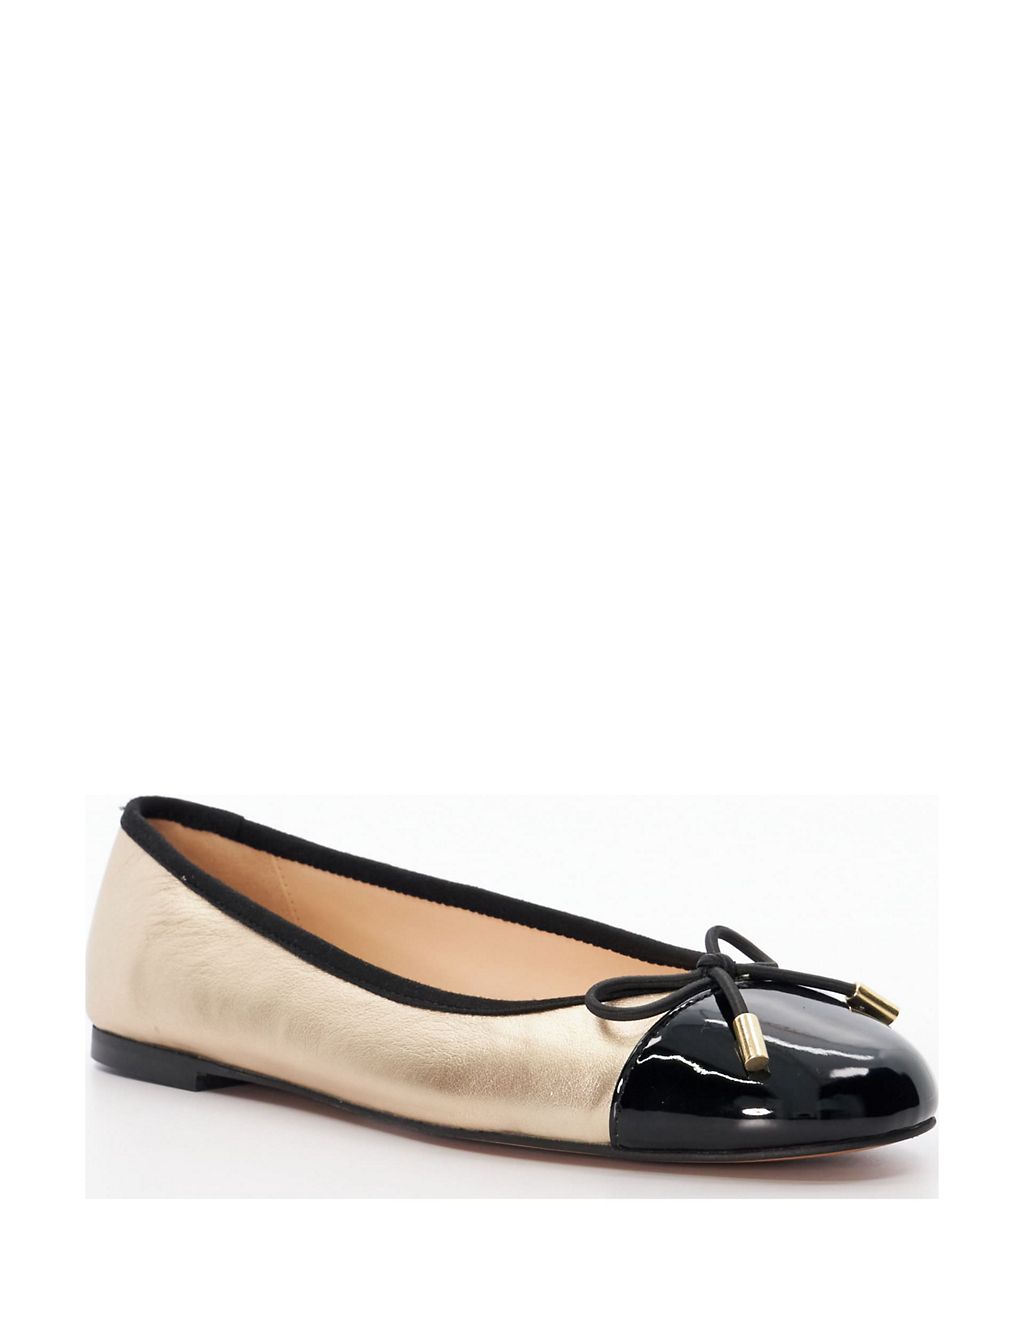 Leather Bow Slip On Flat Ballet Pumps 1 of 5